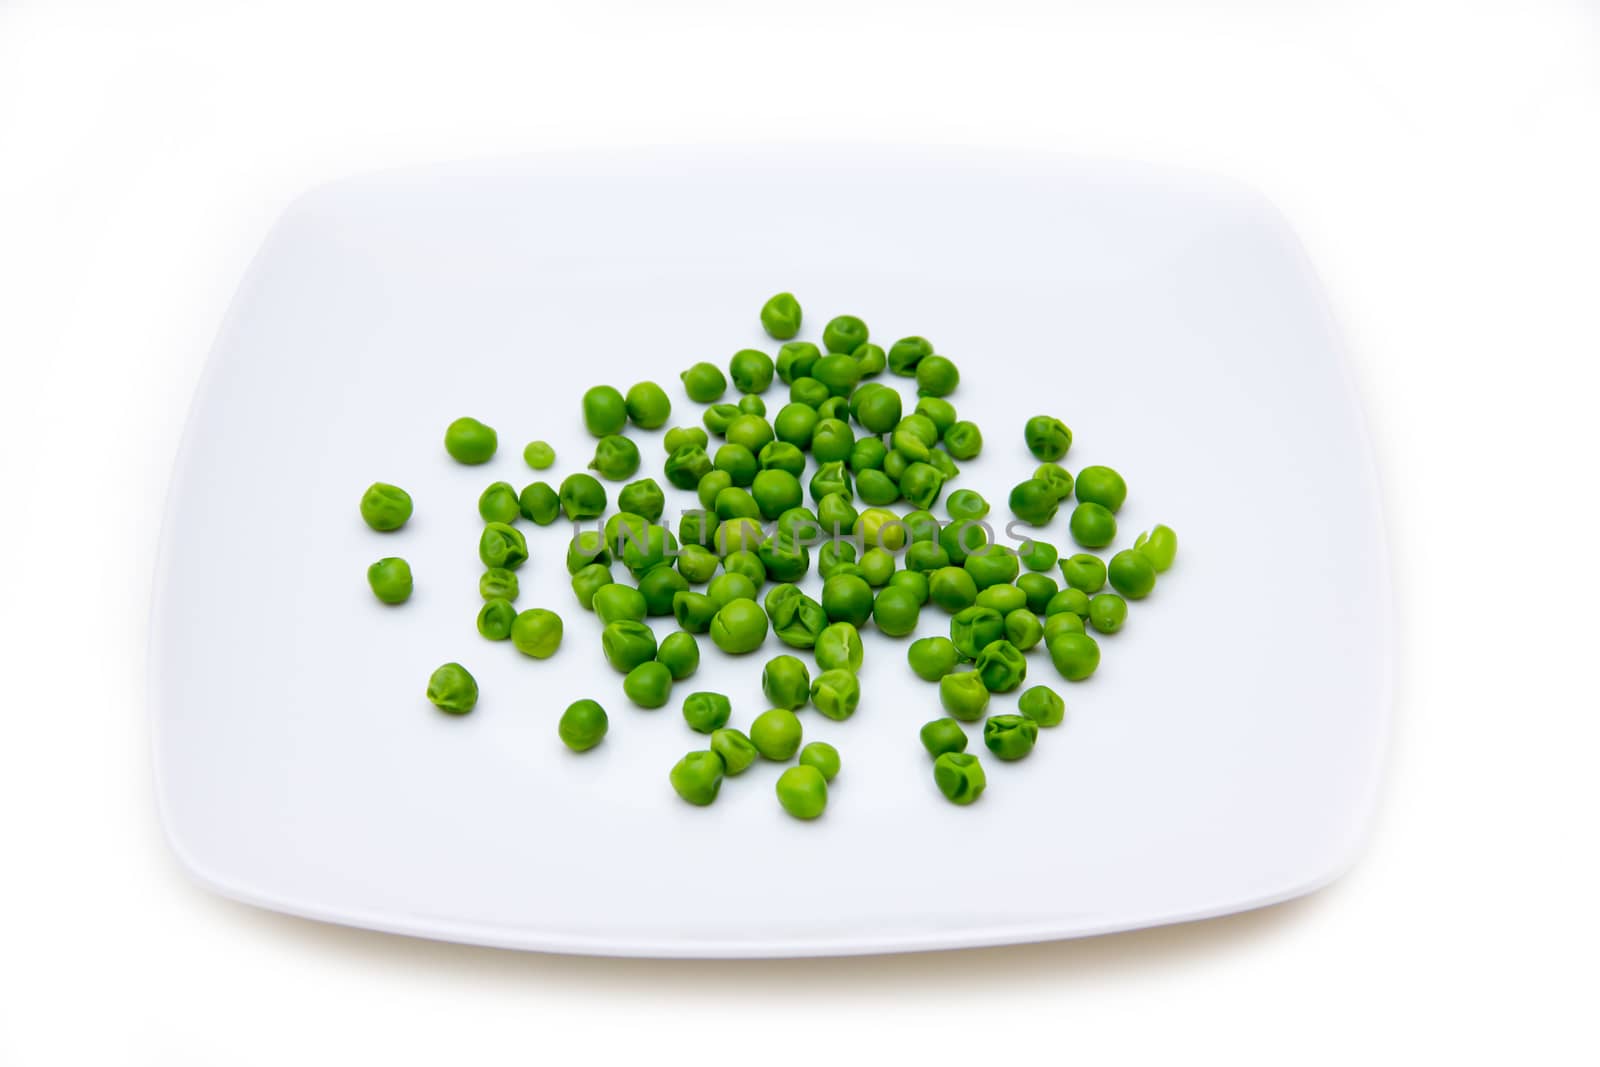 Plate with cooked green peas on a white background